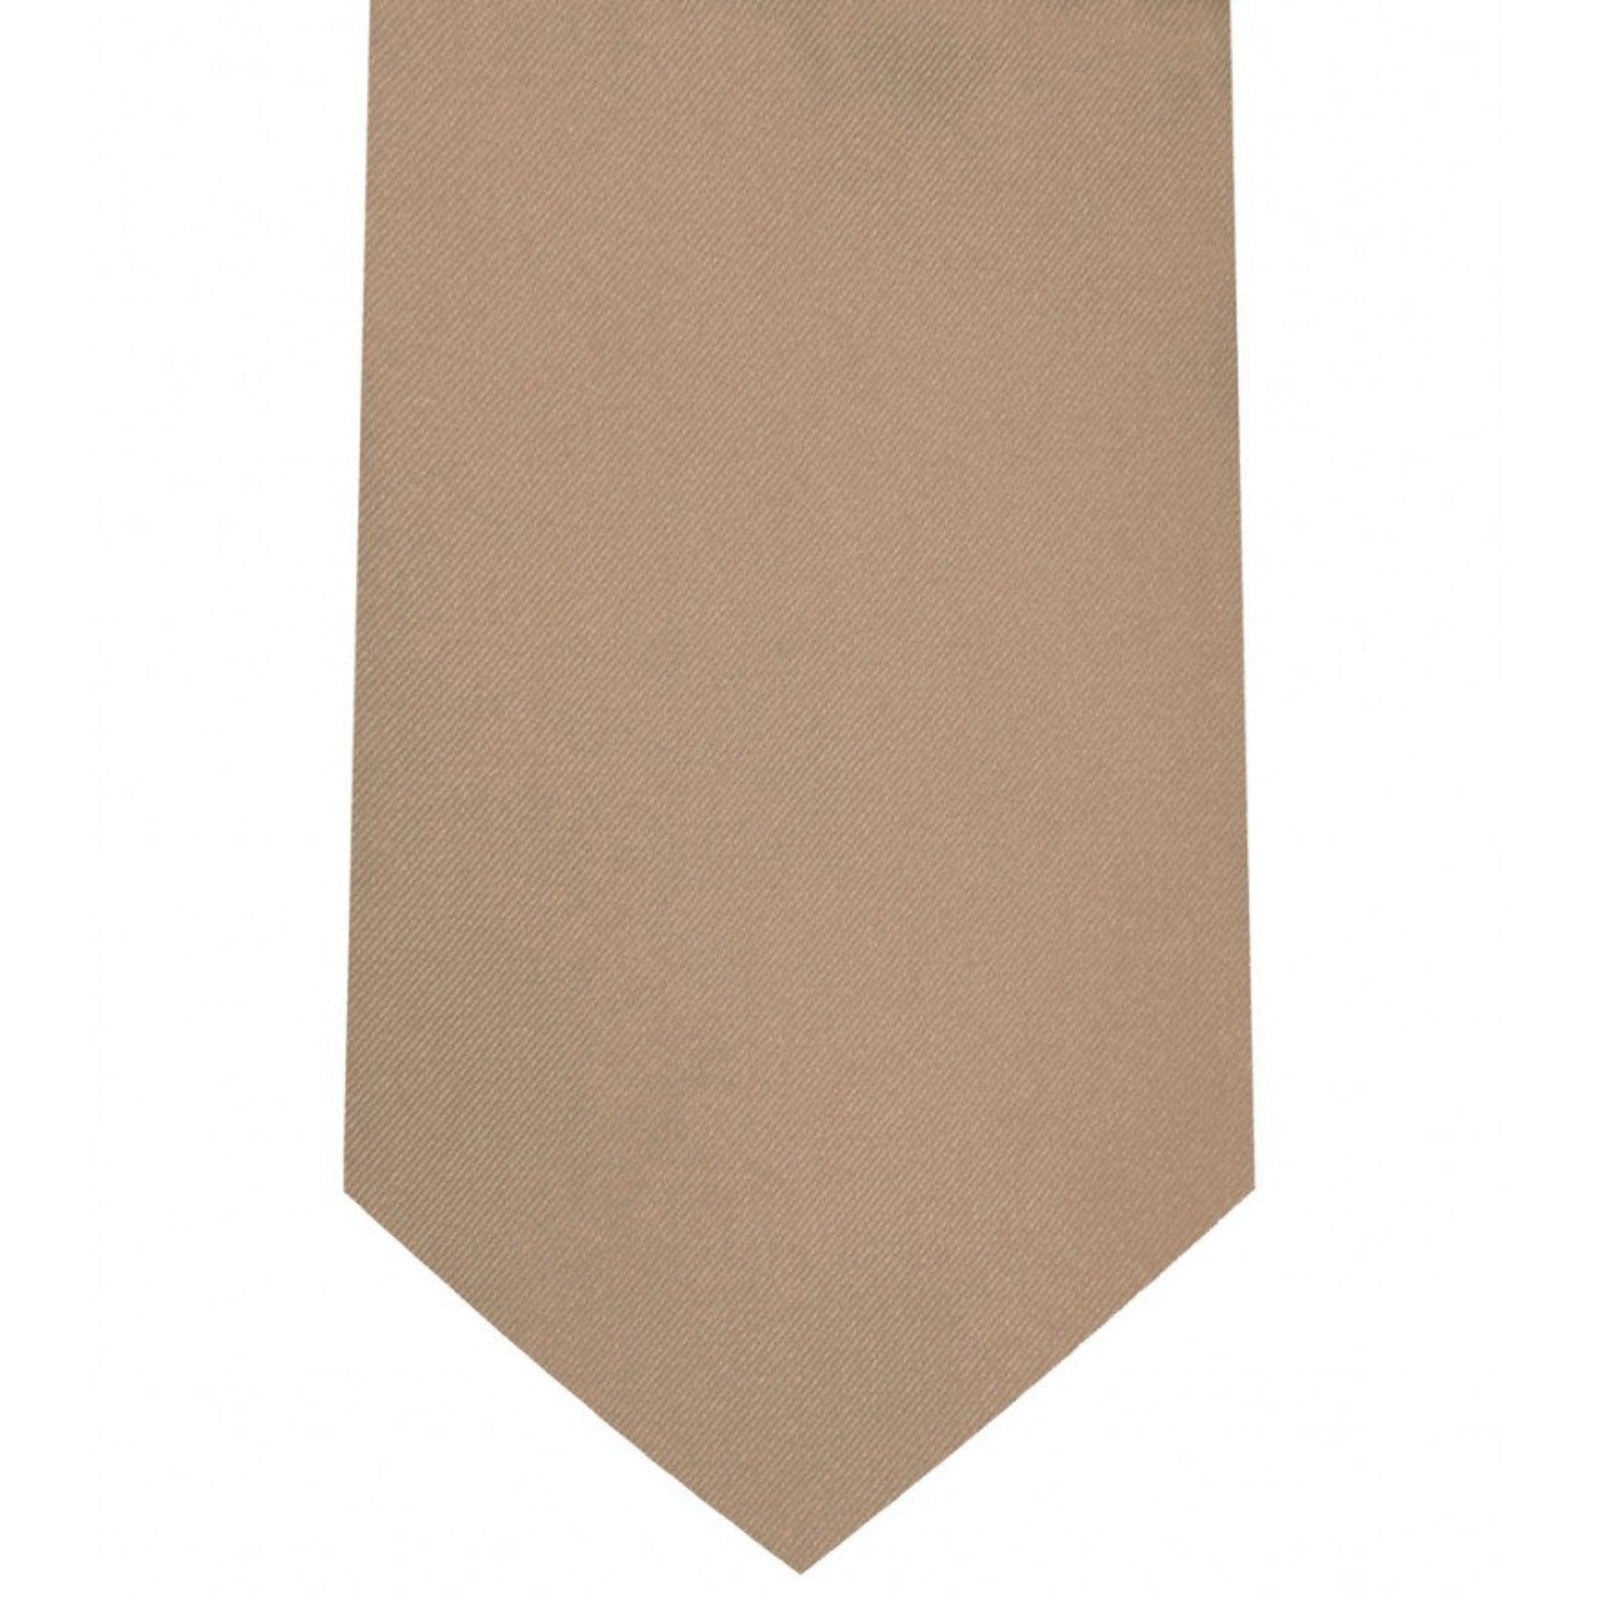 Classic Rose Gold Tie Regular width 3.5 inches With Matching Pocket Square | KCT Menswear